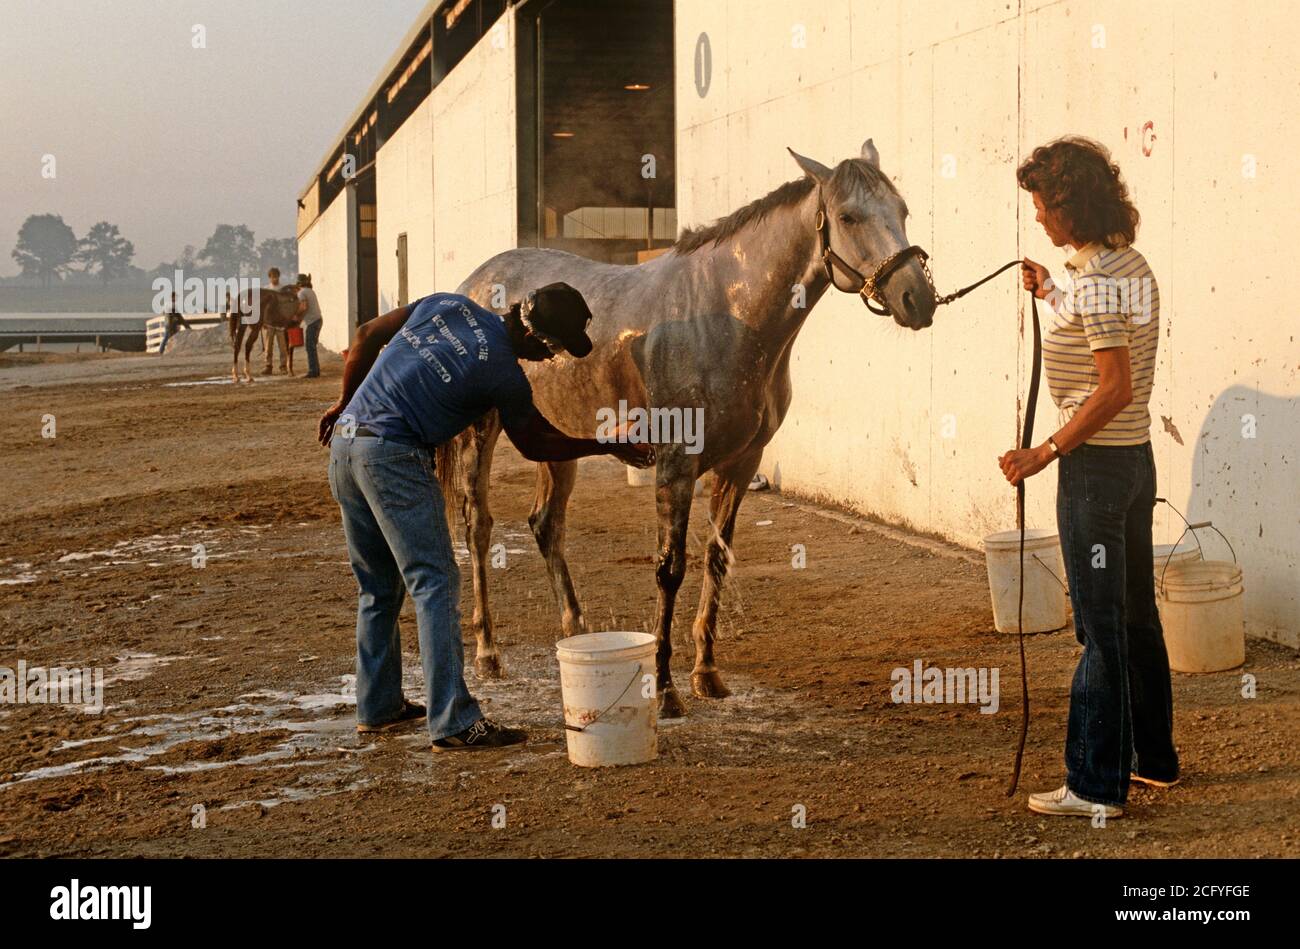 WASHING DOWN RACEHORSE AFTER STRENUOUS EXERCISE, CHURCHILL DOWNS, LOUISVILLE, KENTUCKY, USA, 1980s Stock Photo